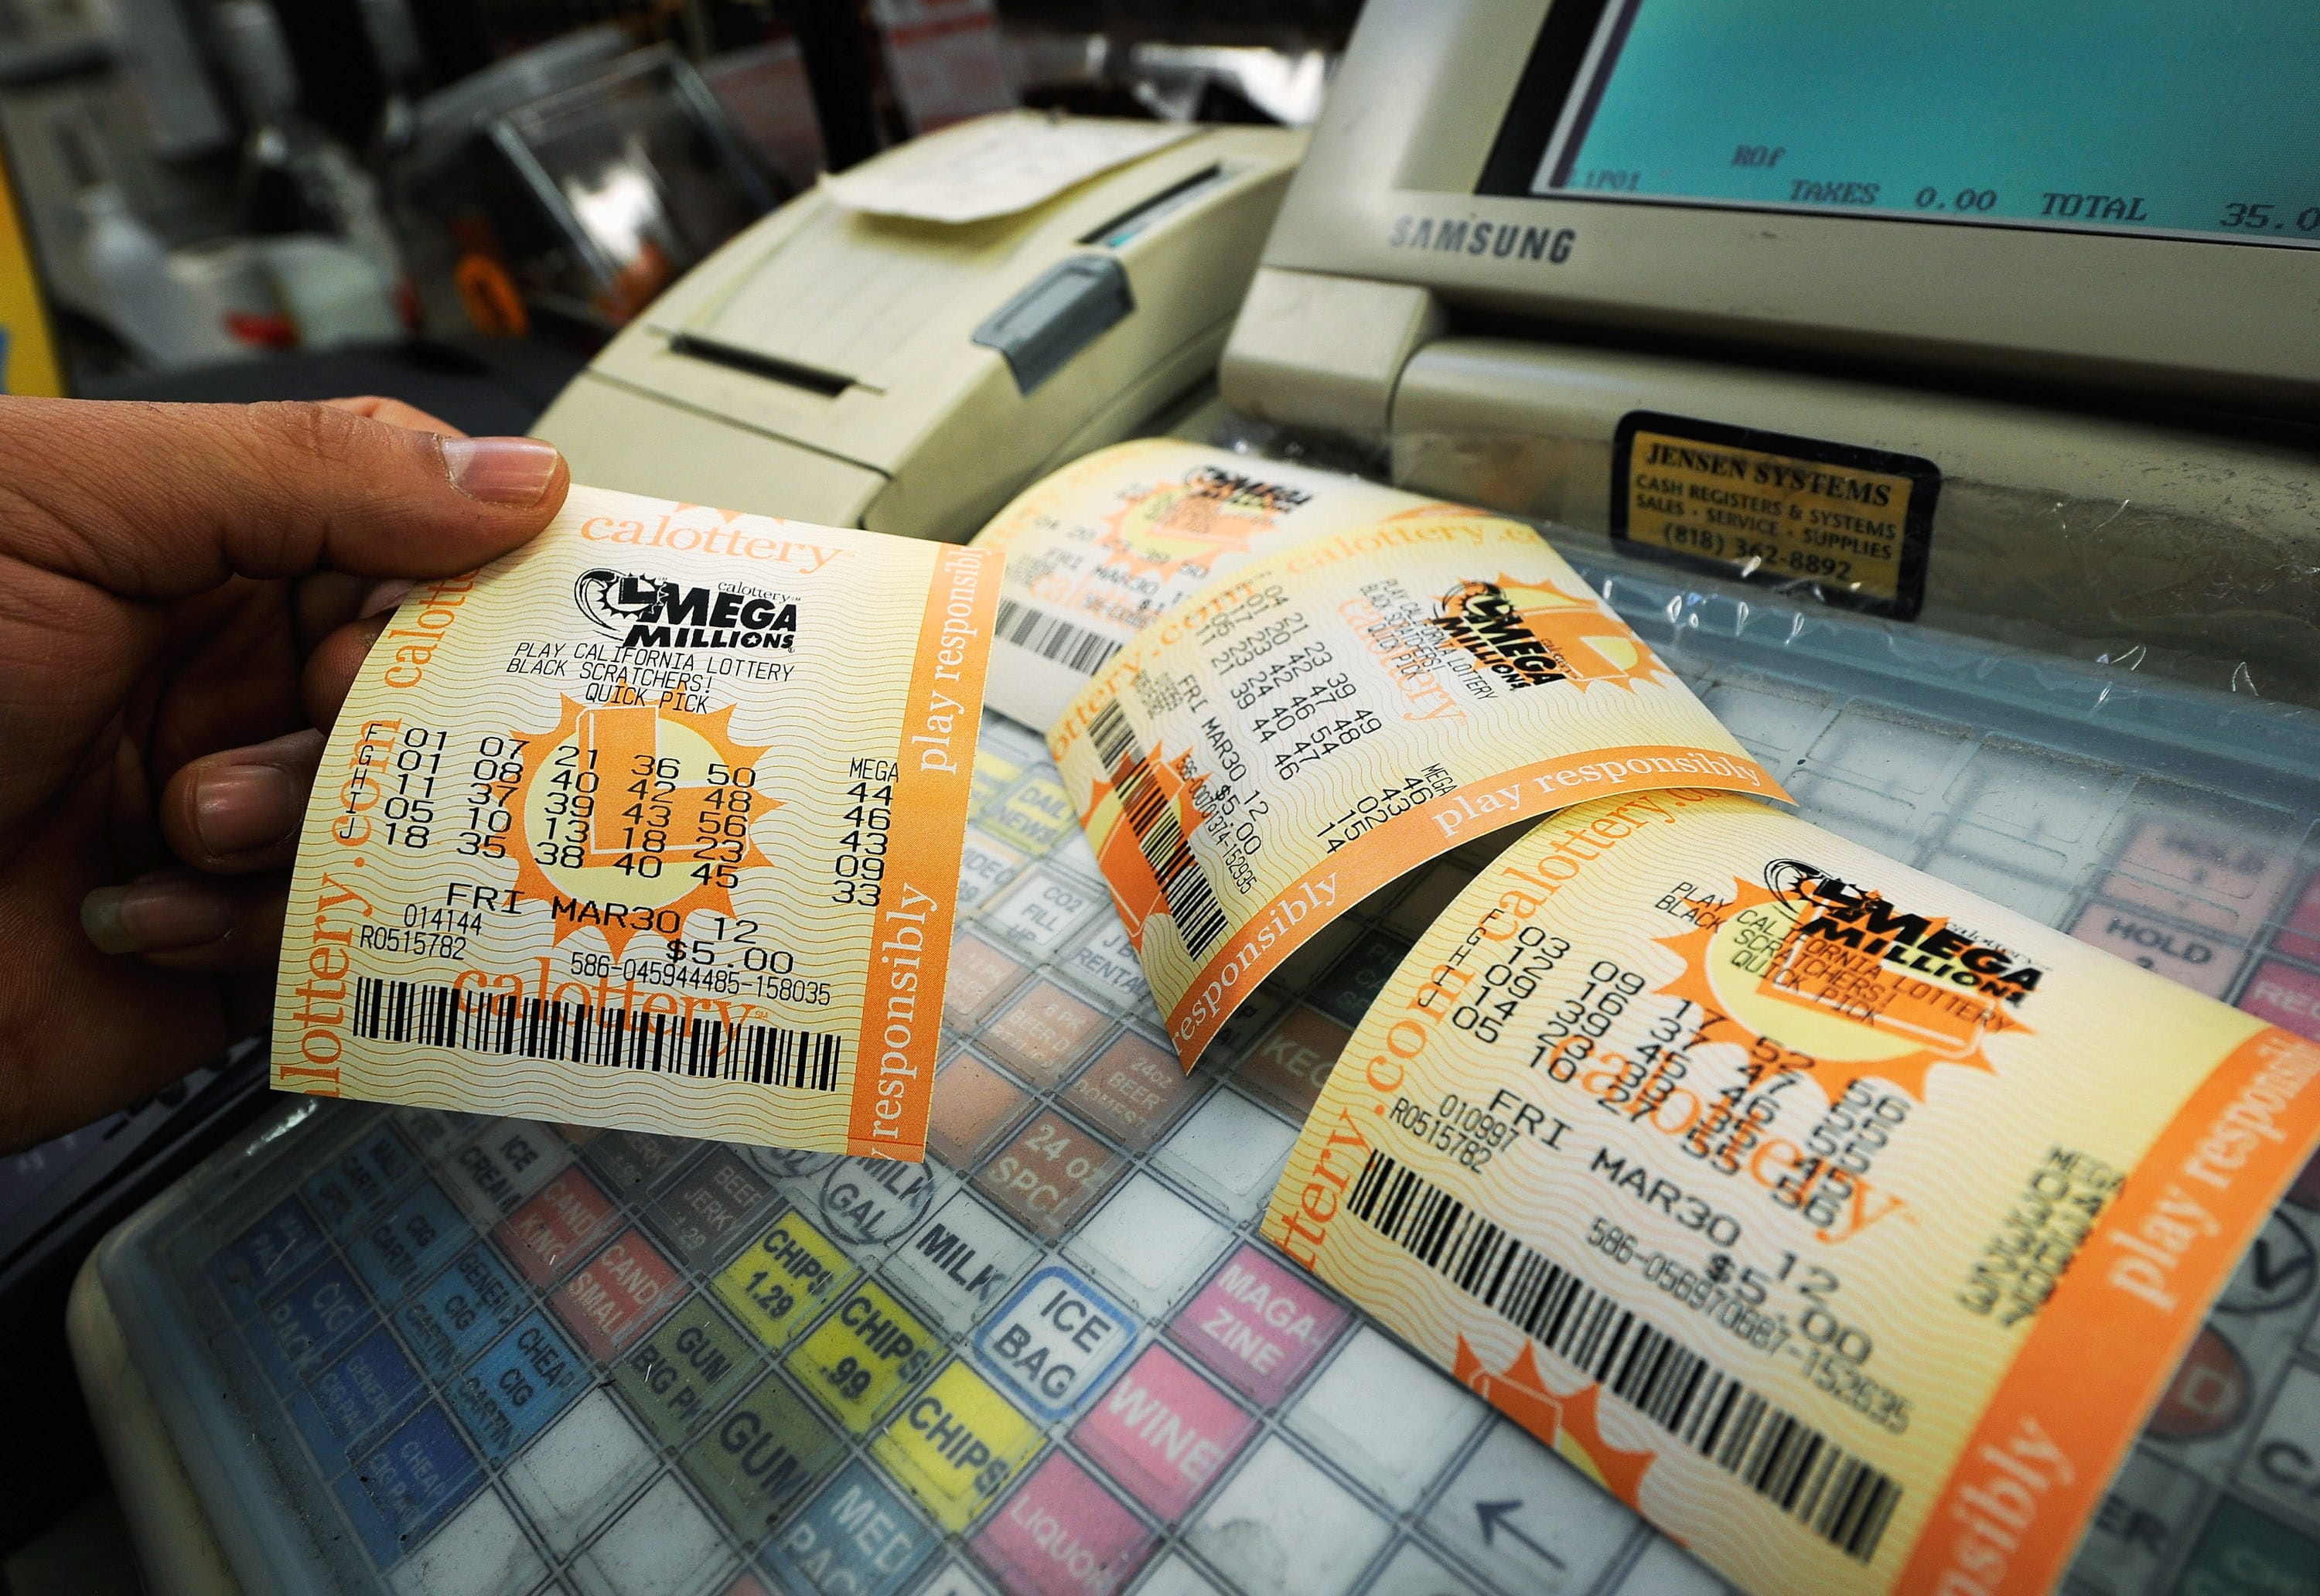 Mega Hundreds of thousands jackpot at $243 million after two months with no winner